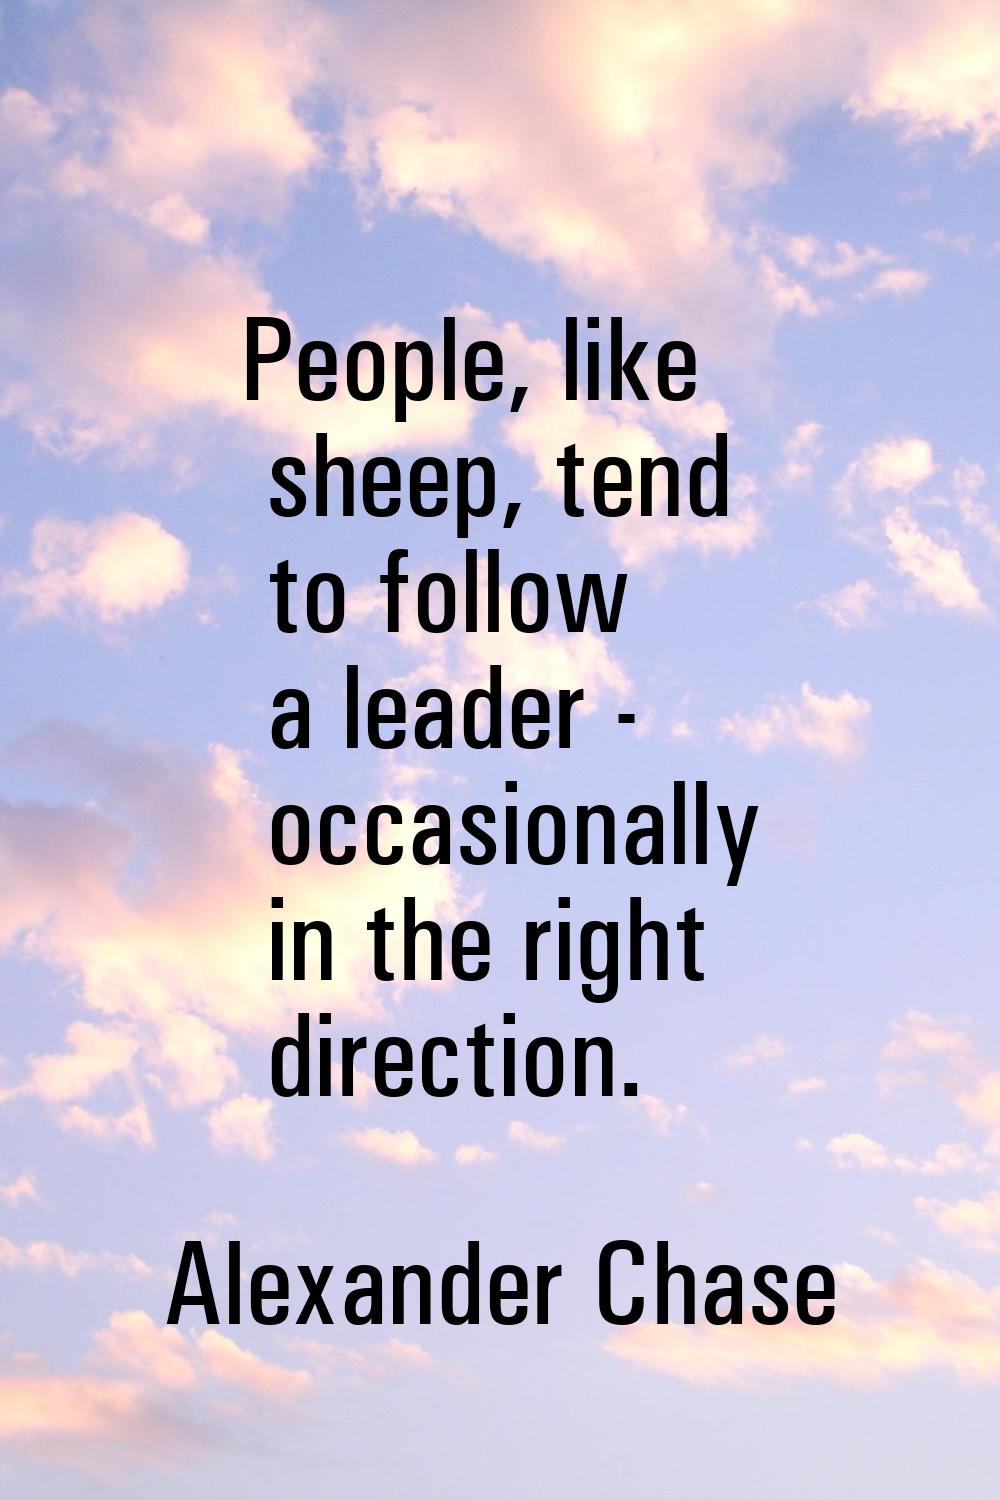 People, like sheep, tend to follow a leader - occasionally in the right direction.